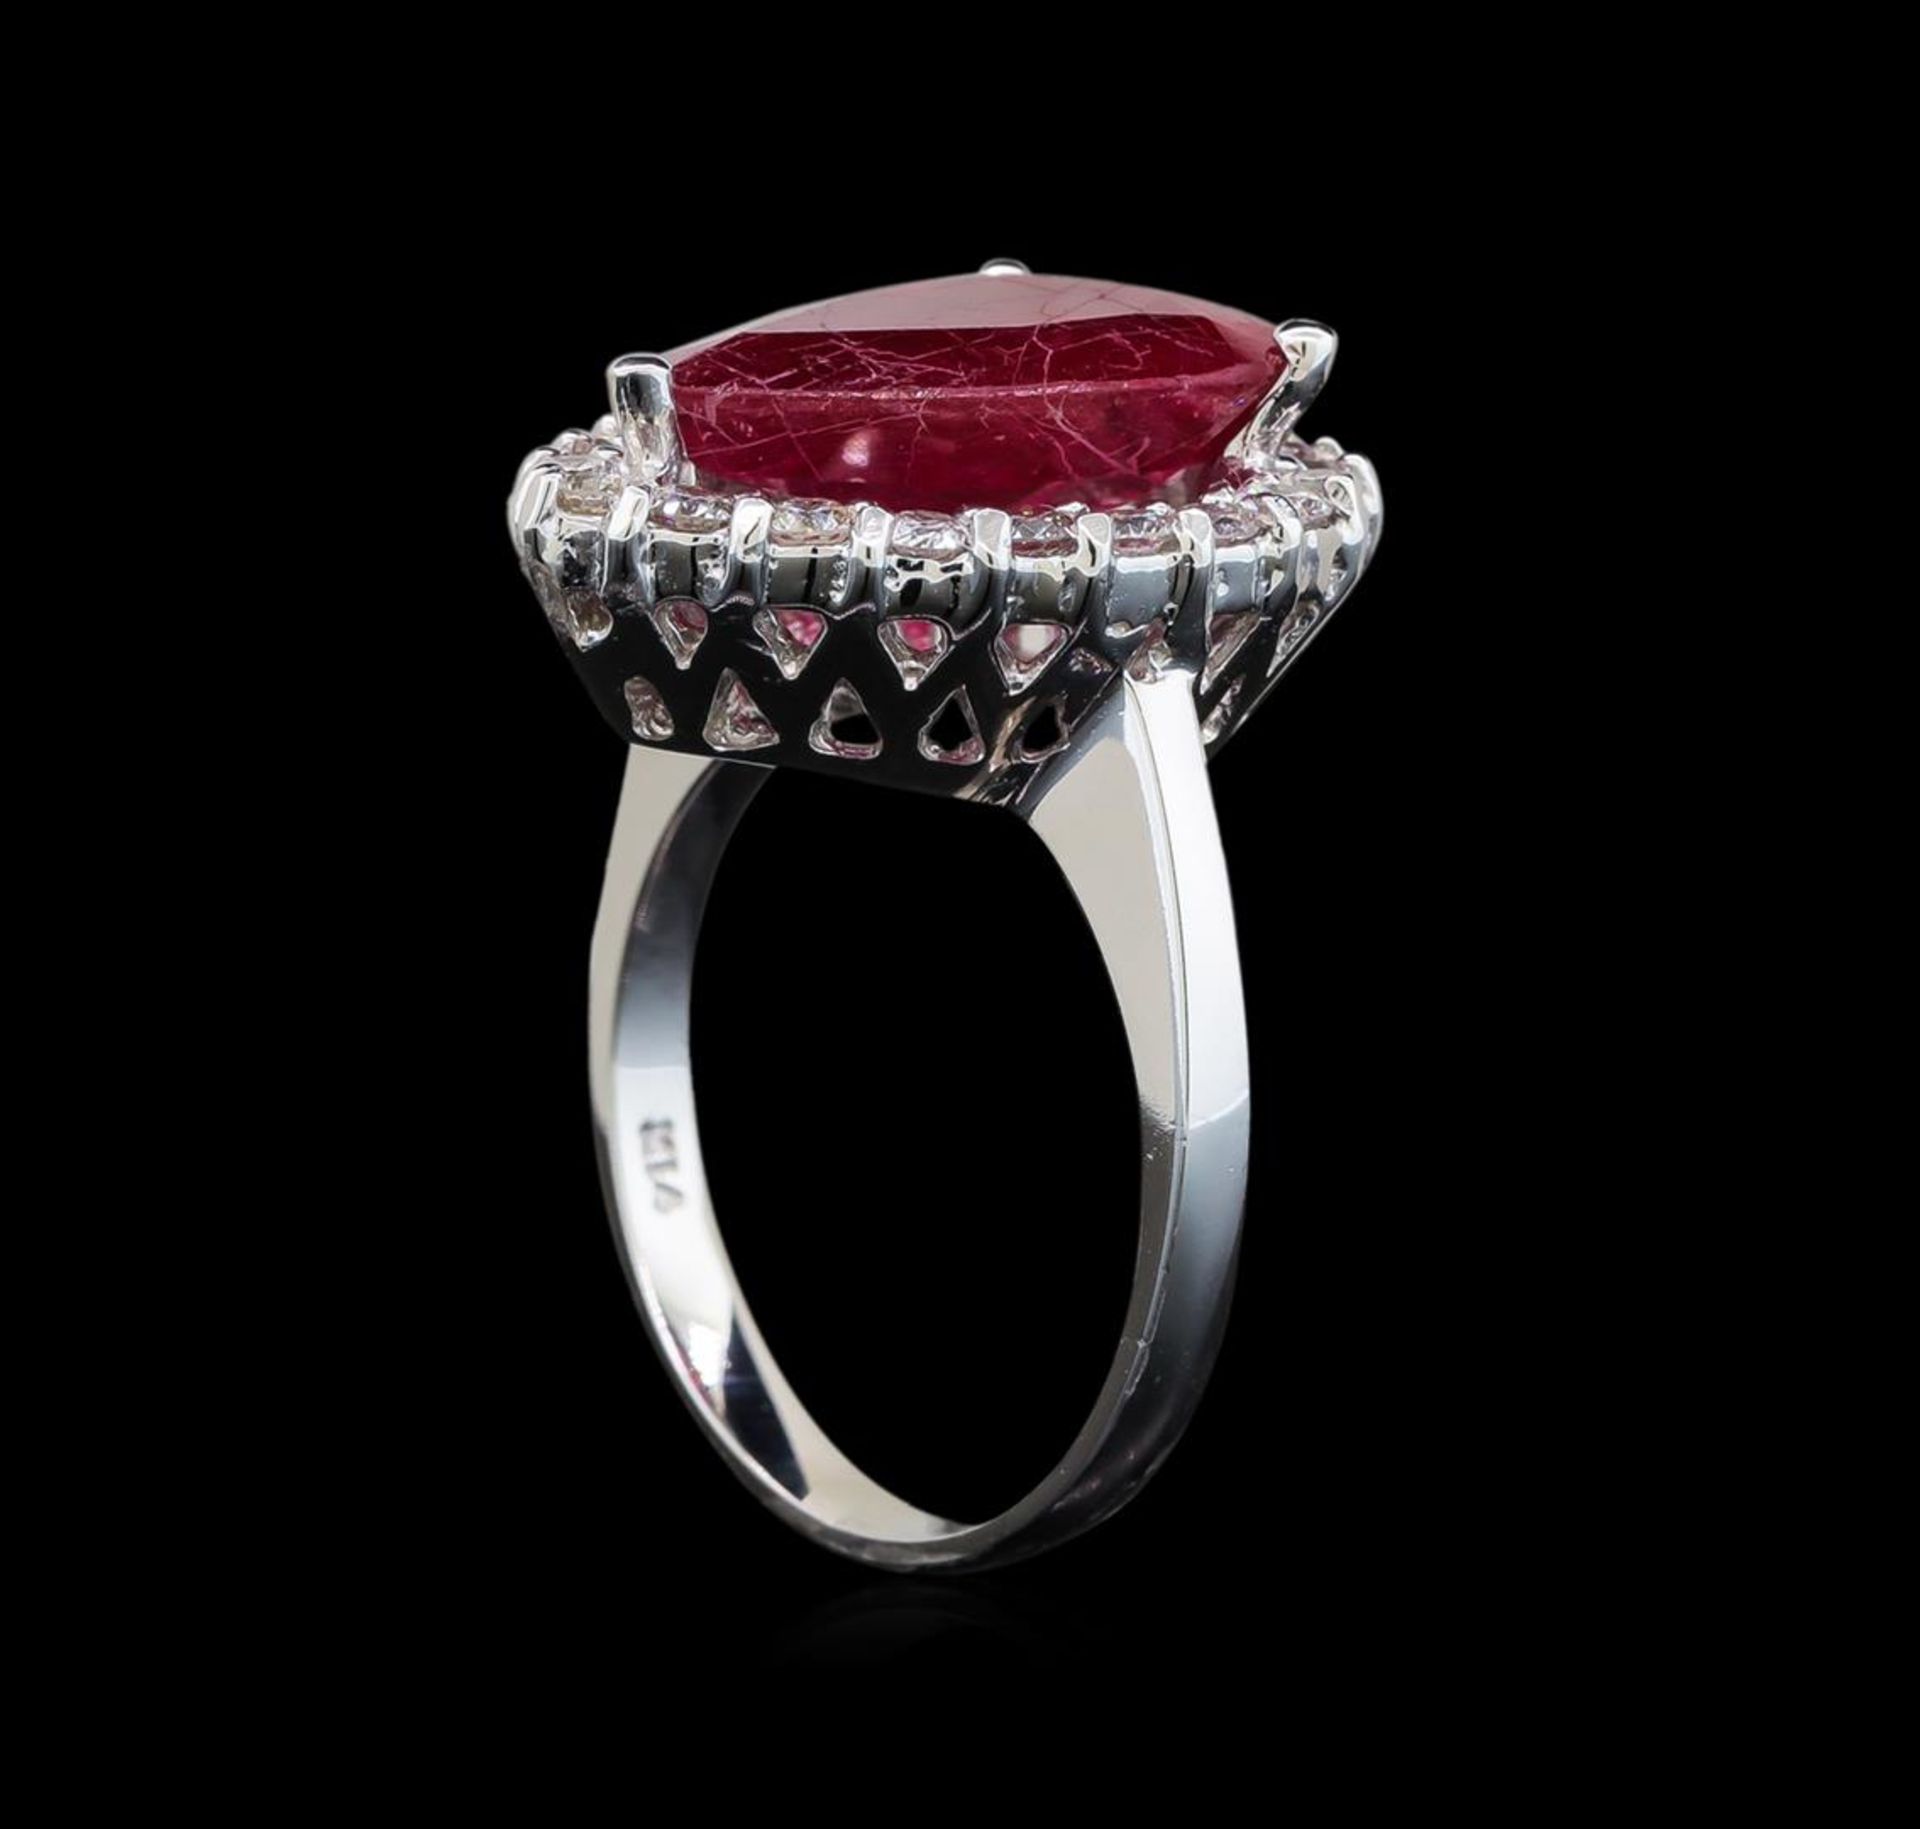 14KT White Gold 5.88ct Ruby and Diamond Ring - Image 4 of 5